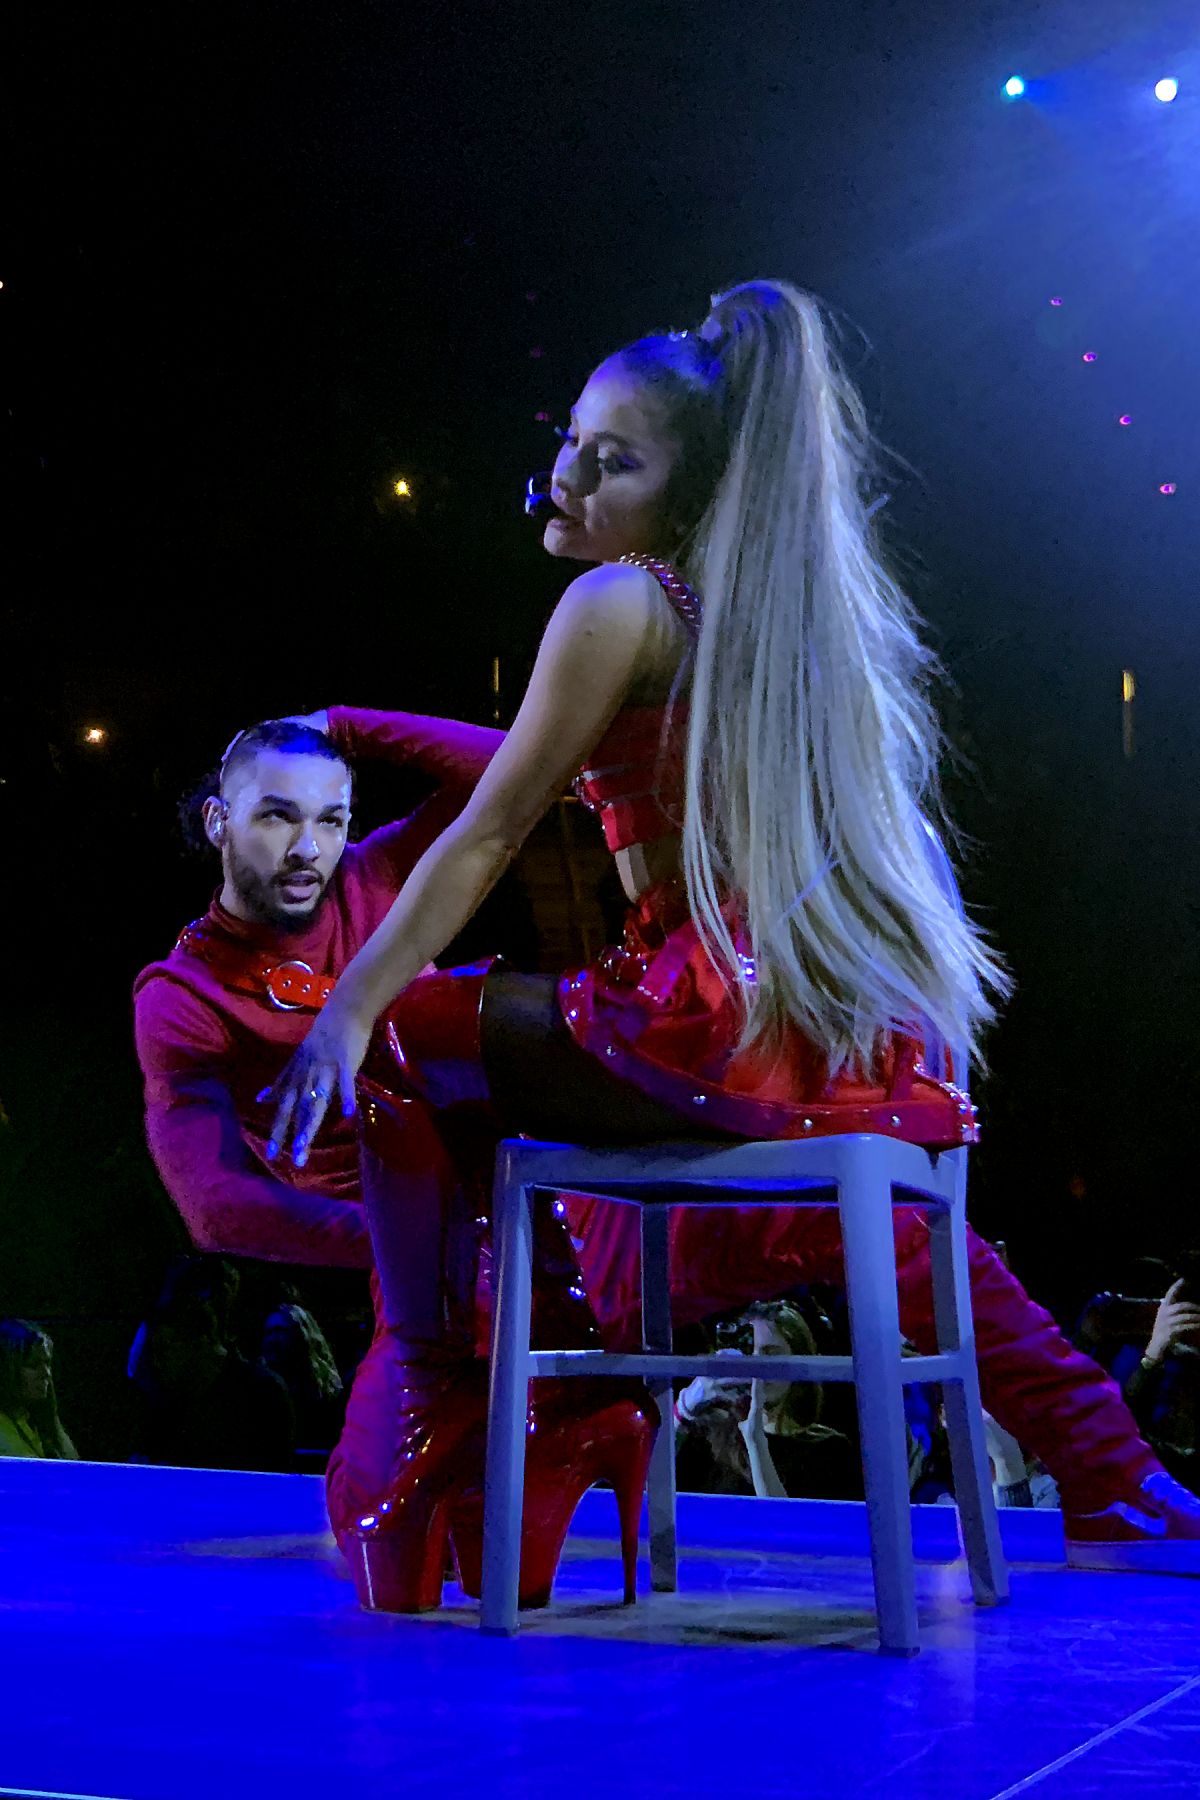 ariana-grande-performs-at-sweetener-world-tour-in-albany-03-18-2019-8.jpg